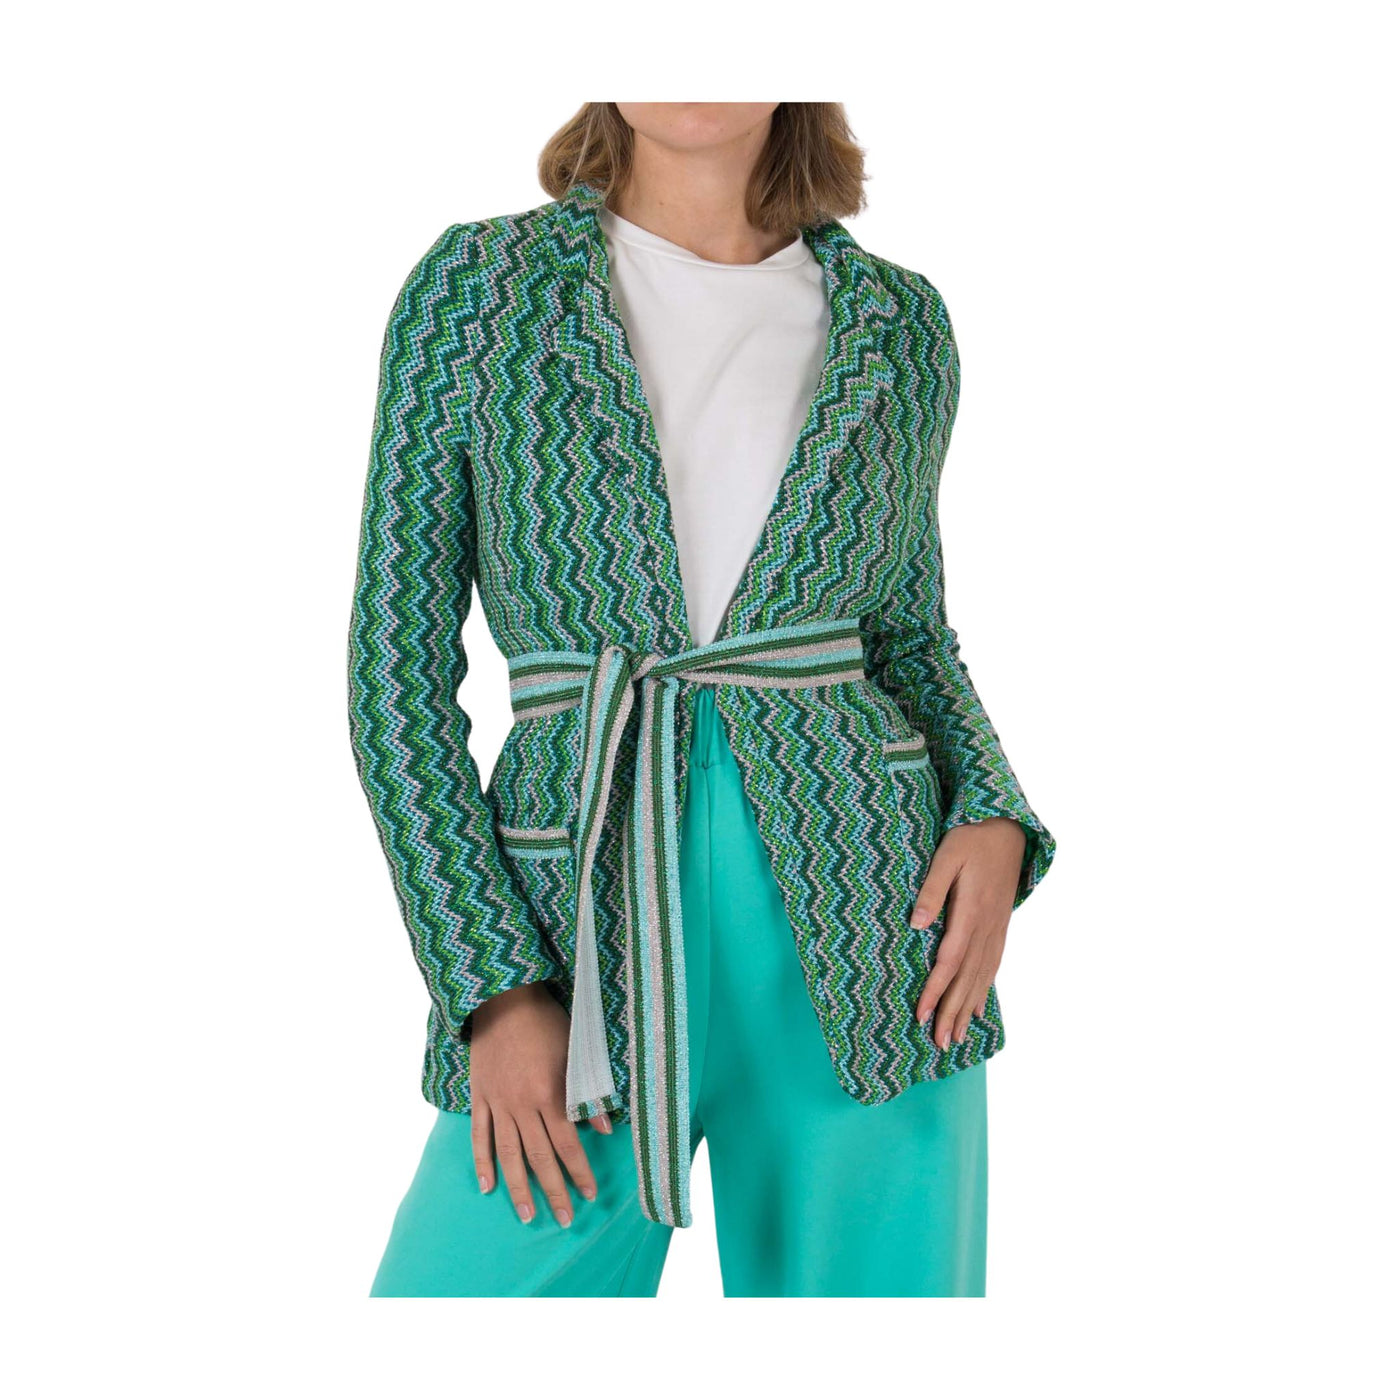 Women's knitted jacket with zig zag pattern